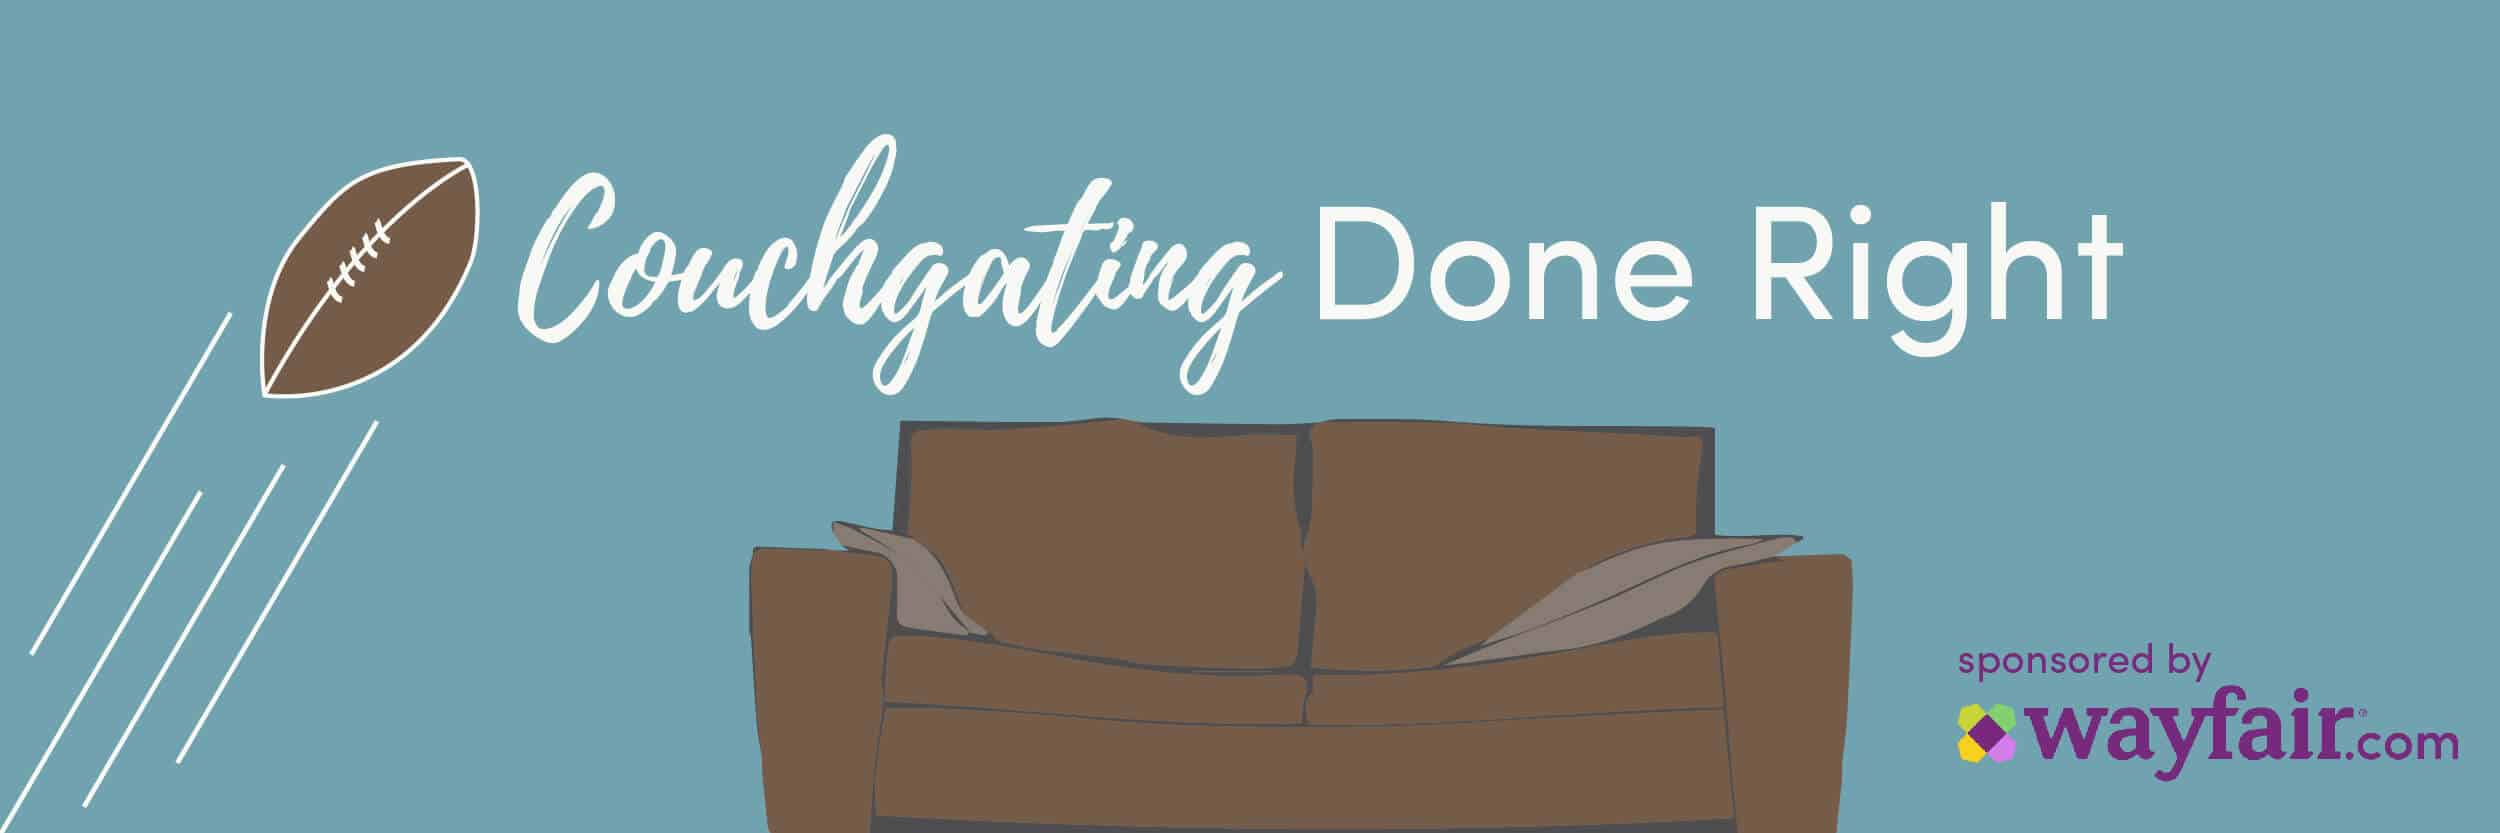 image of a couch with a football and text that says "couchgating done right sponsored by Wayfair.com"